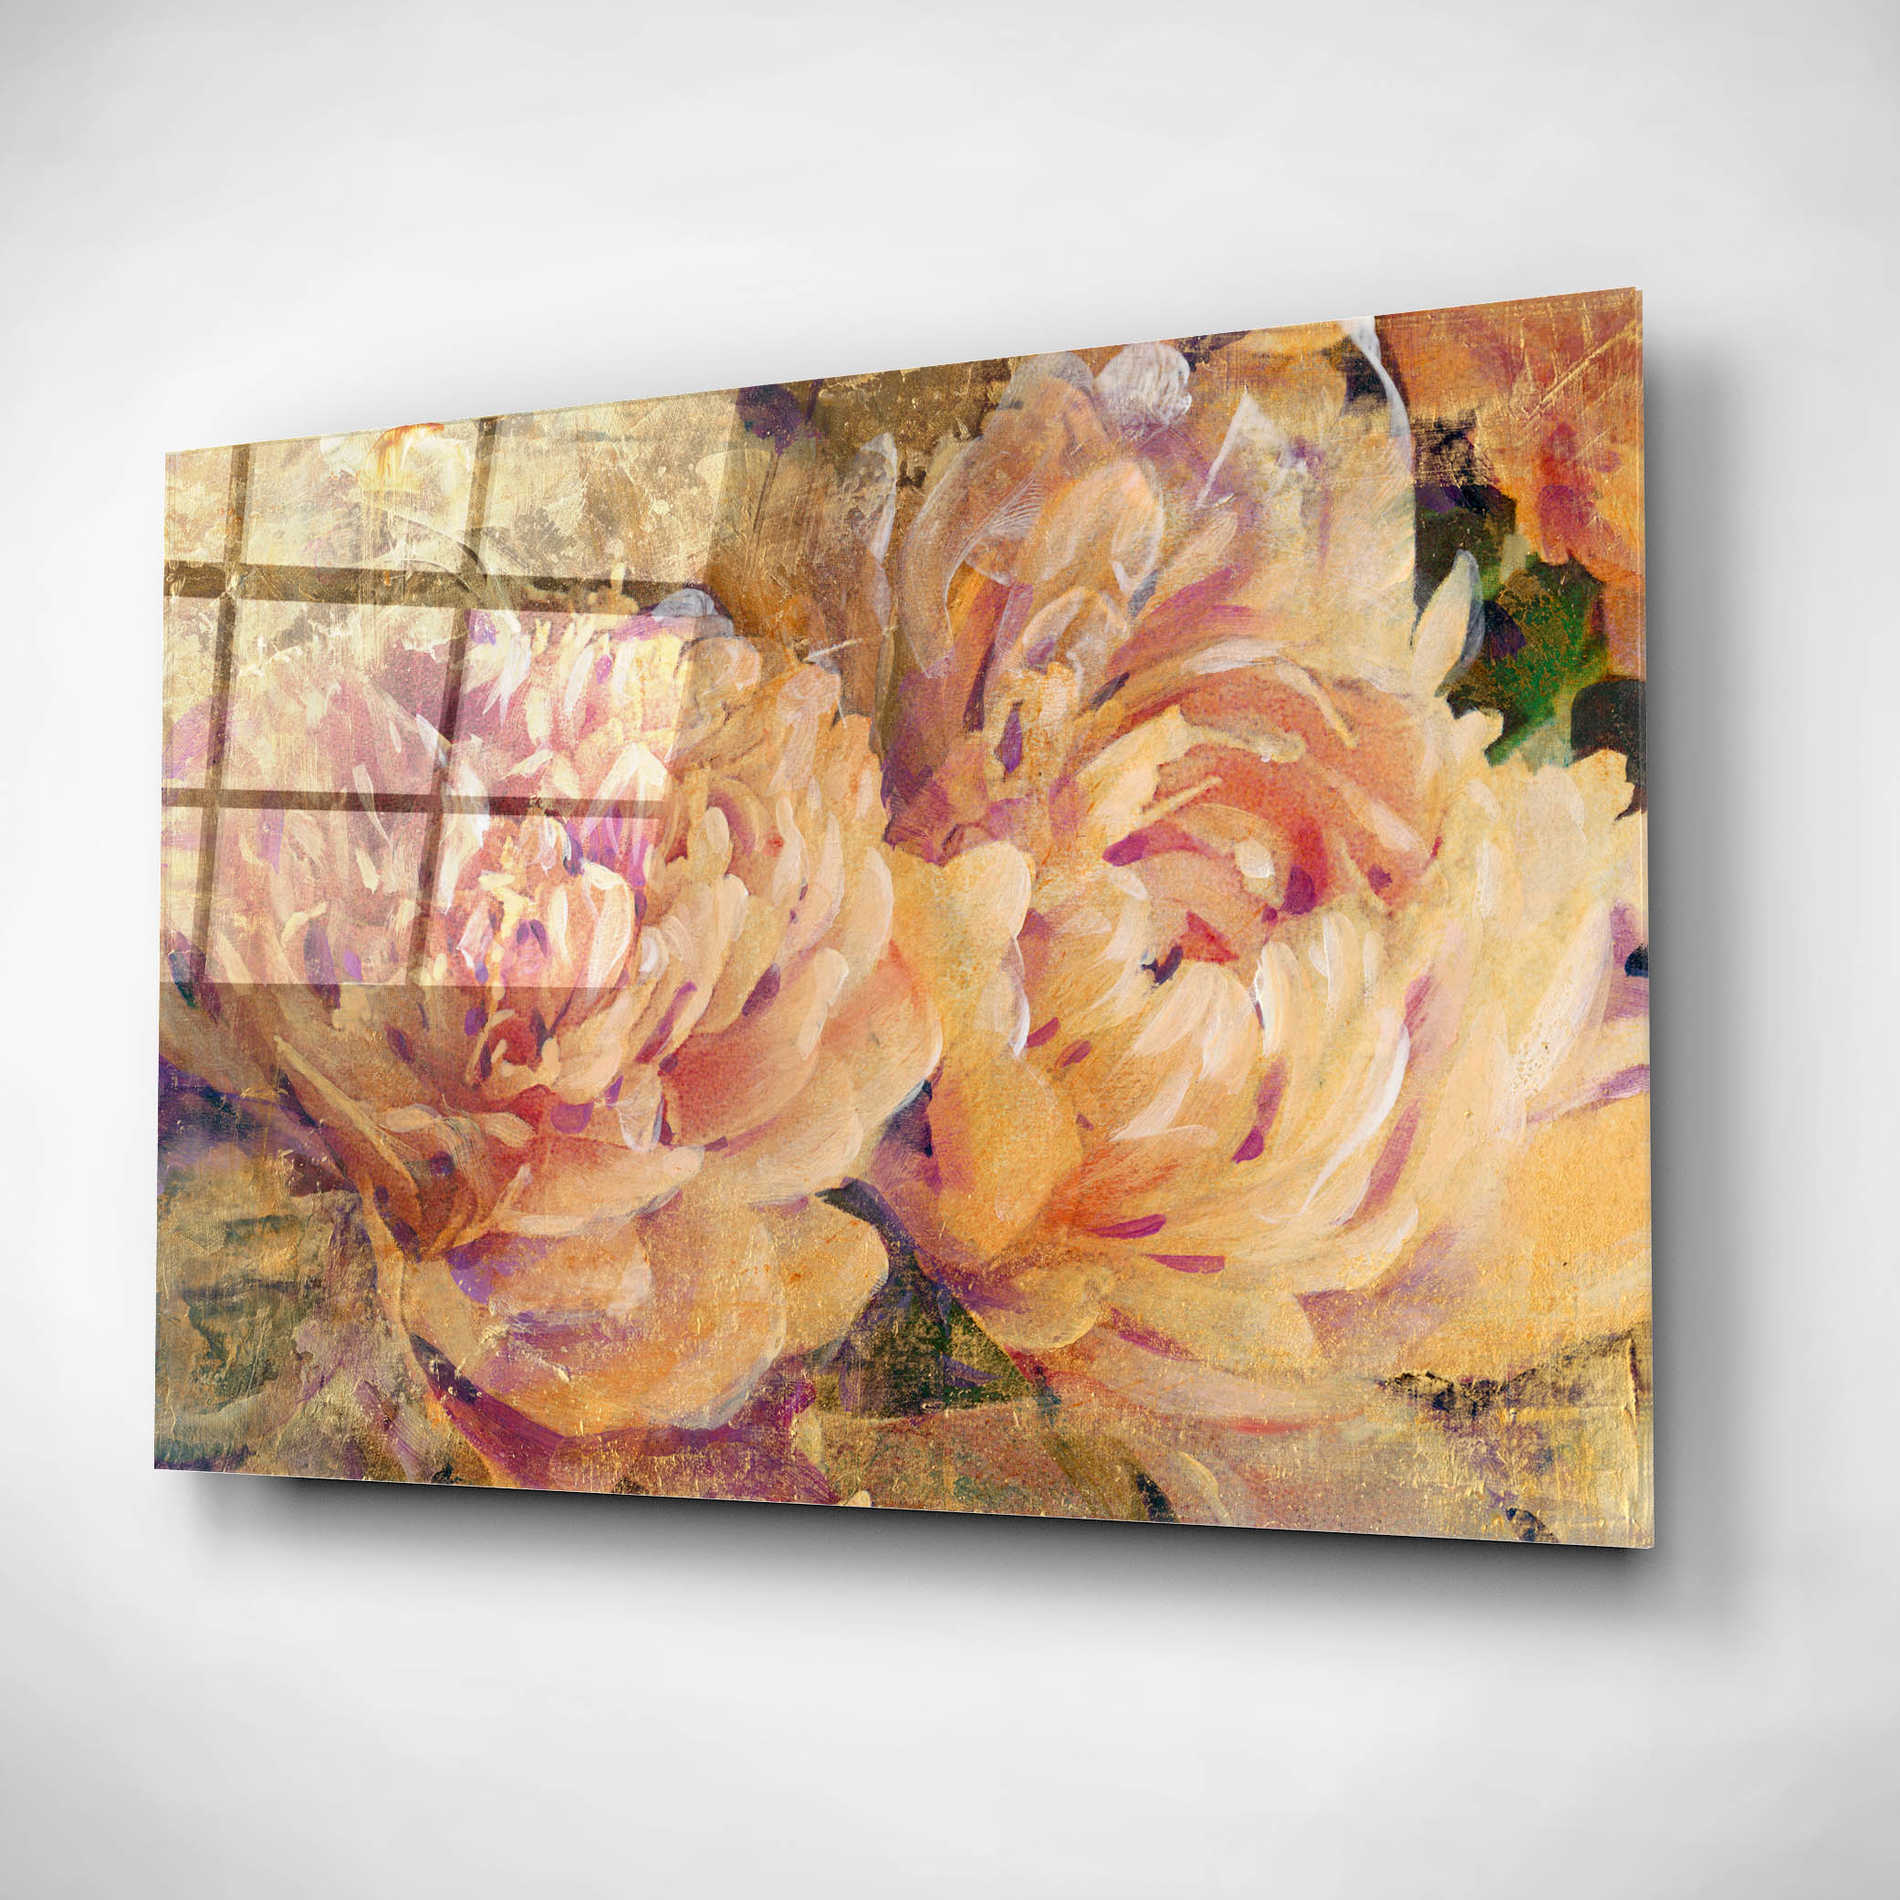 Epic Art 'Floral in Bloom III' by Tim O'Toole, Acrylic Glass Wall Art,24x16